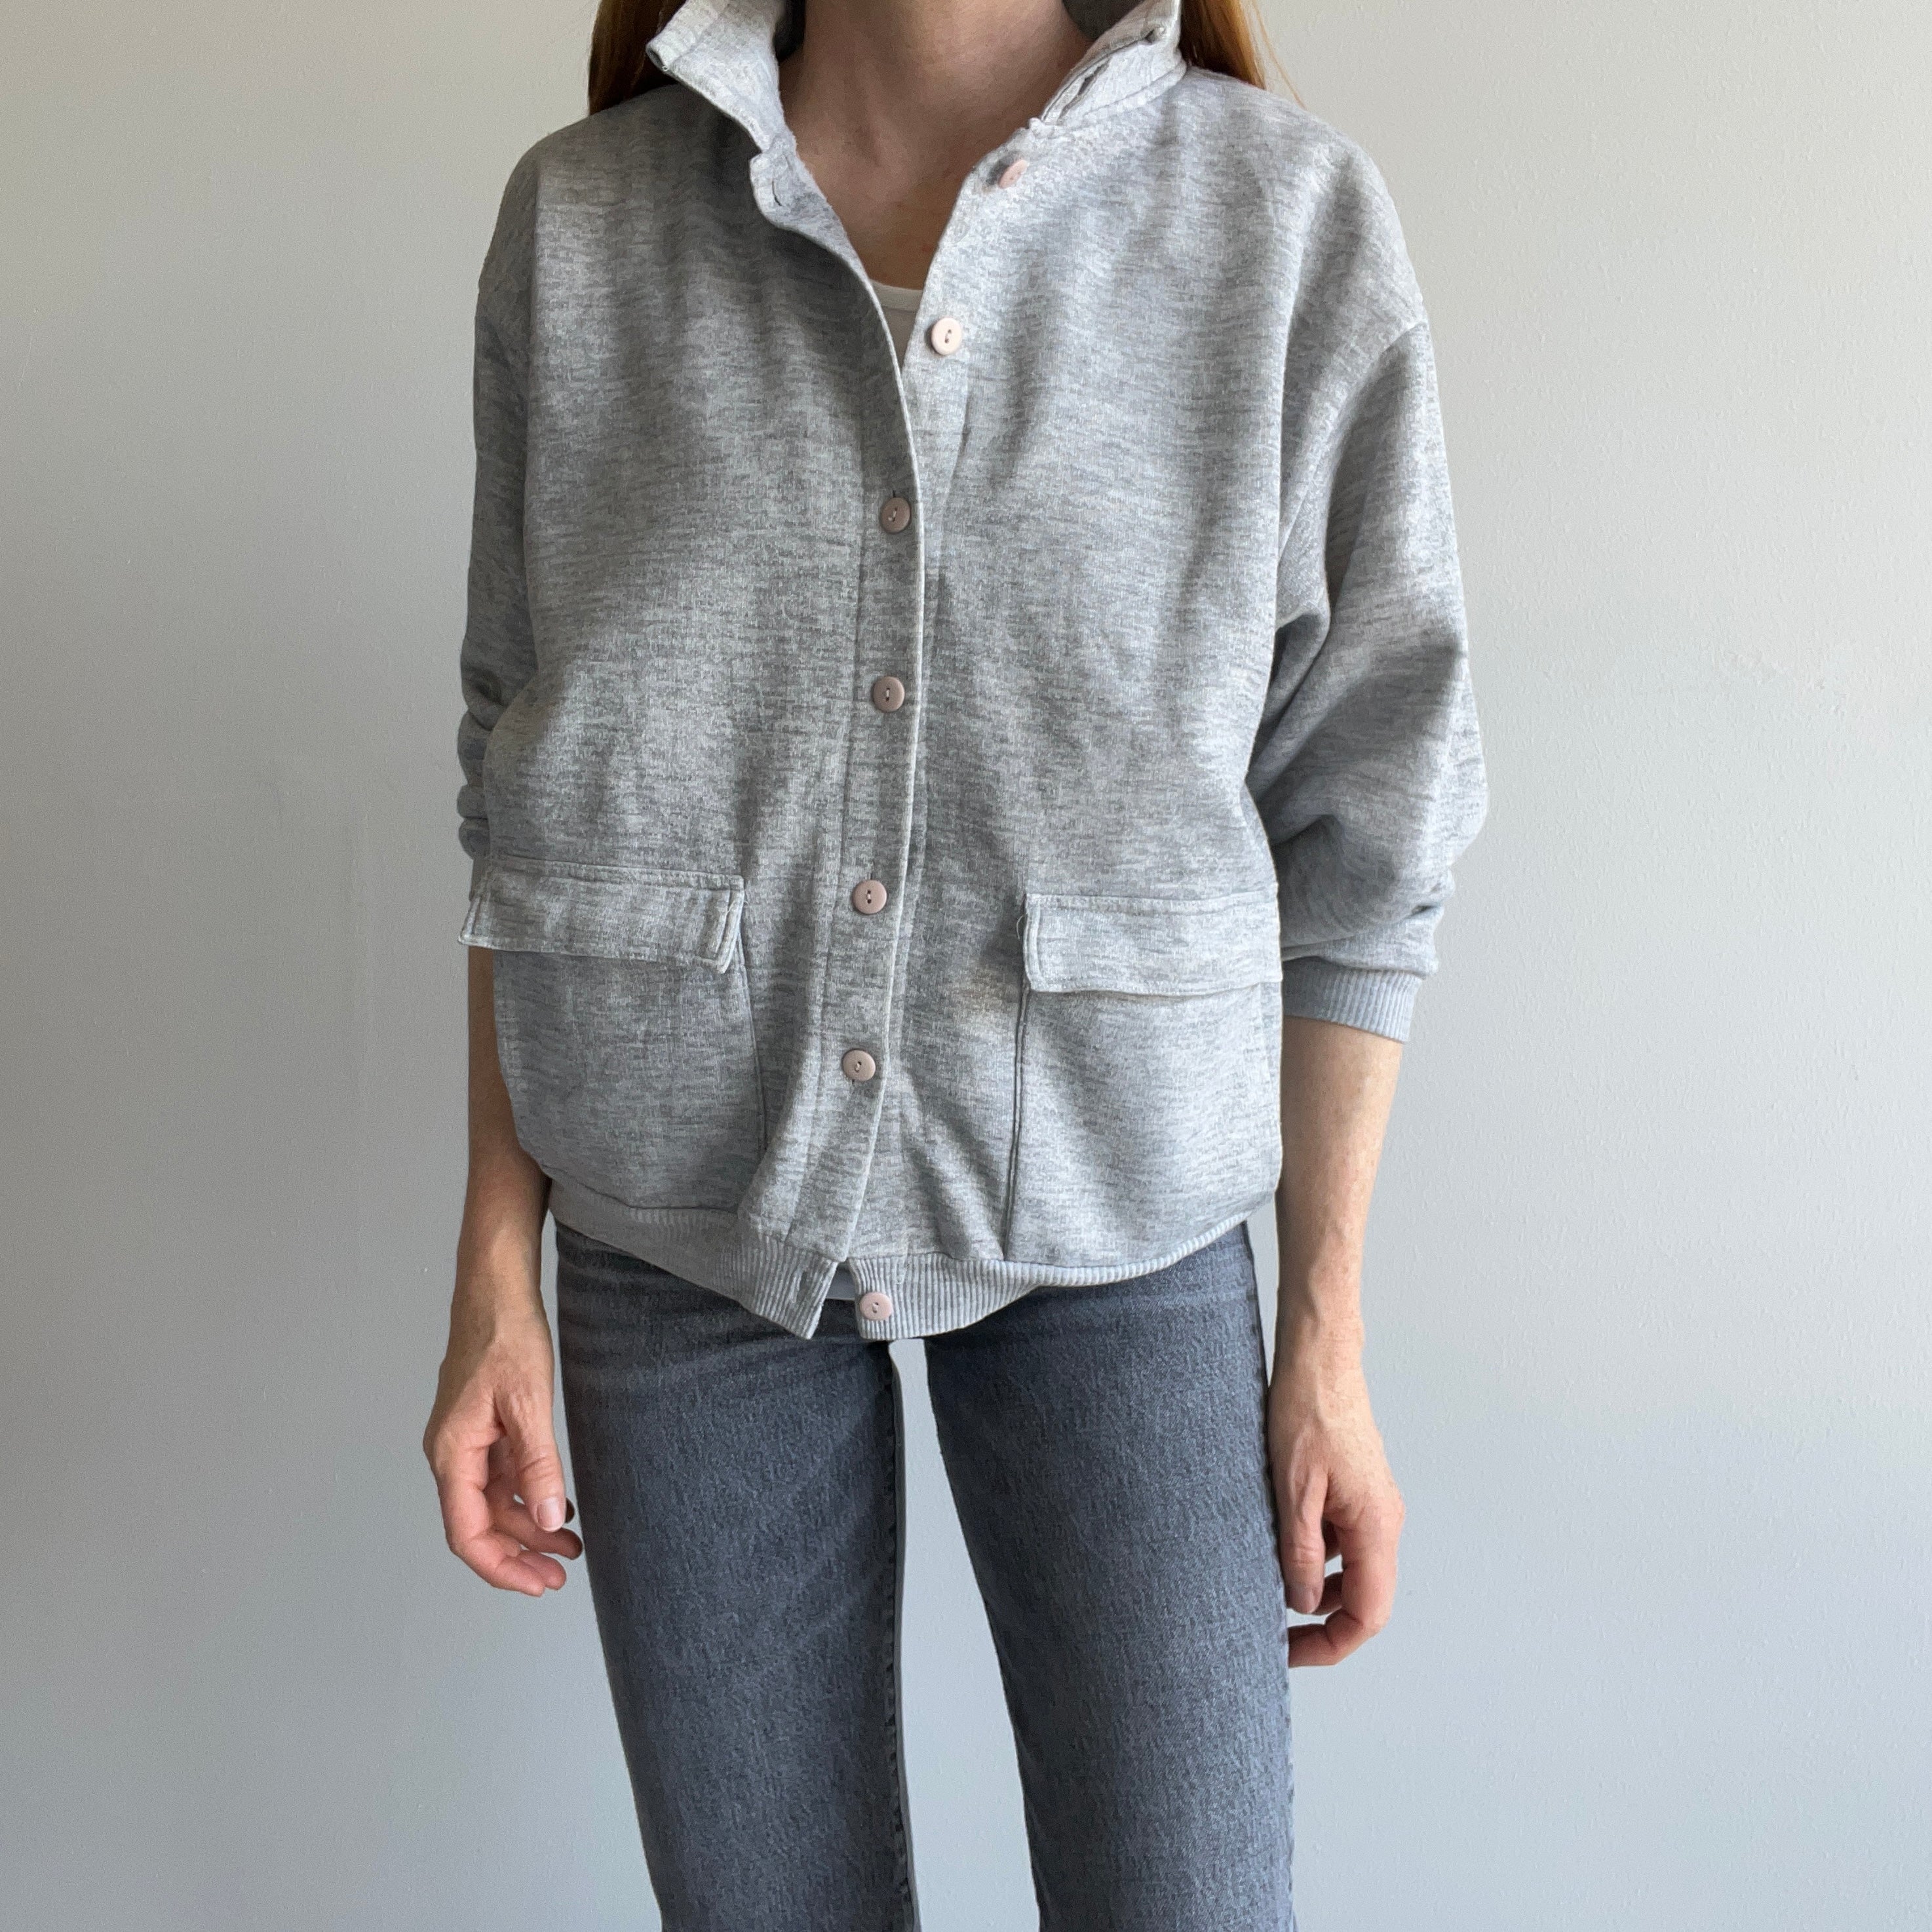 1980s Button Up Blank Gray Cardigan with Pockets for Snacks